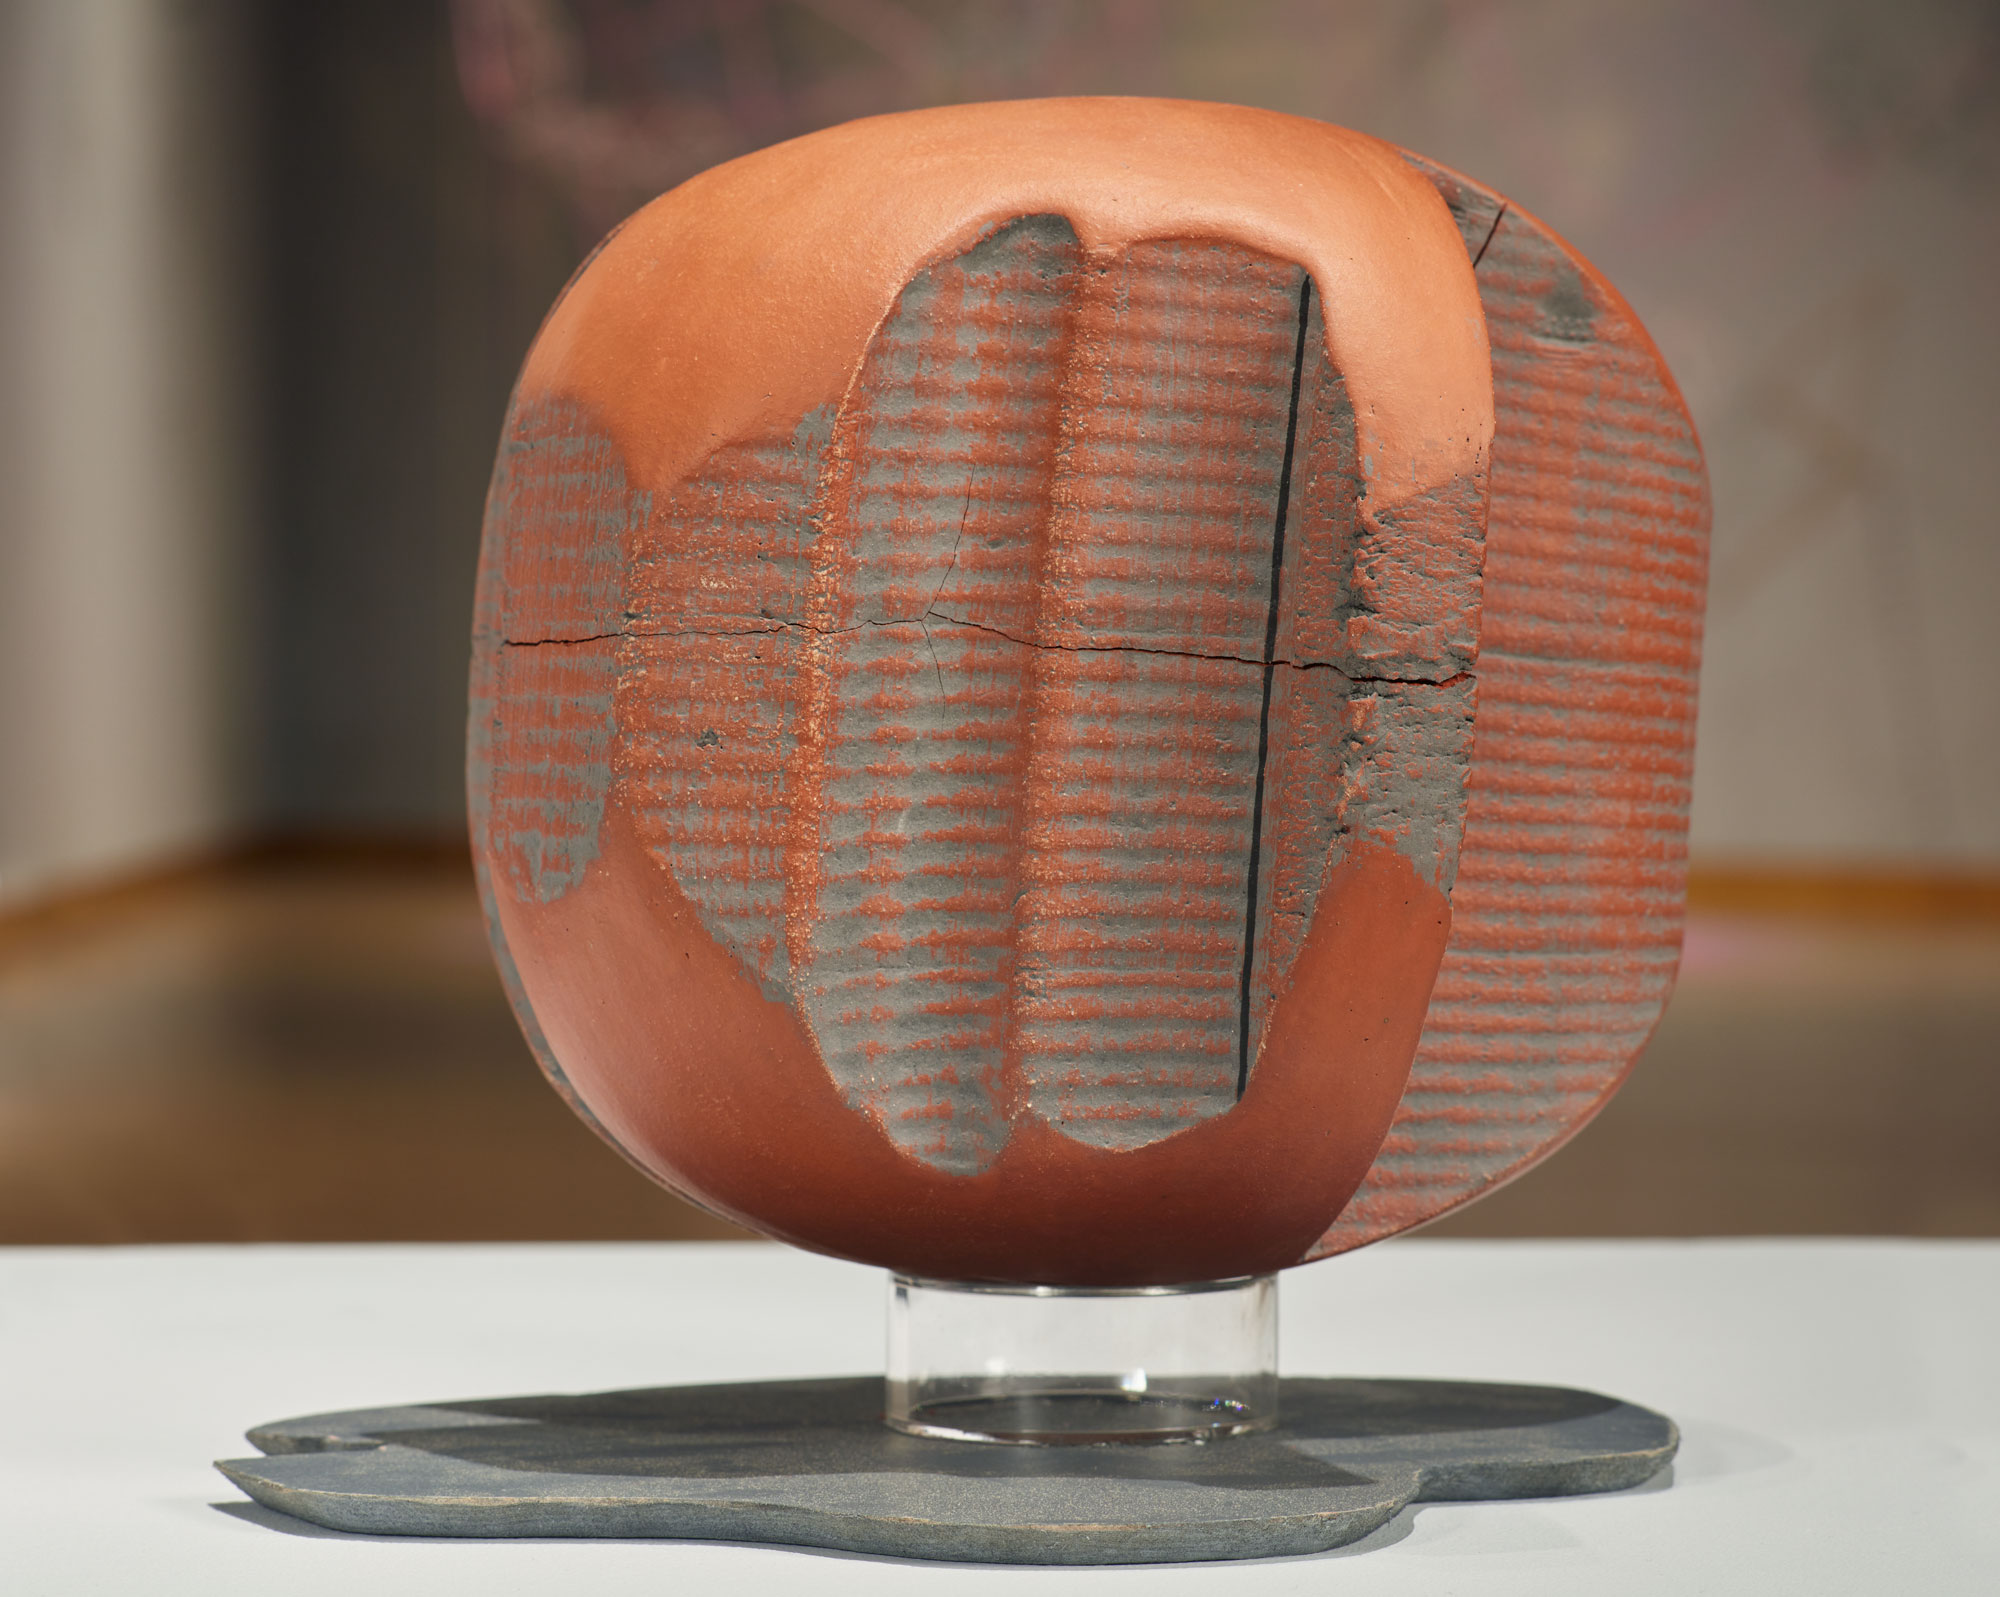 Kodi Thompson, Grey Spheroid, 2021. ceramic, underglaze, MDF. 9 x 9 x 9 in. Courtesy of the artist. Installation view of Skyway 20/21 exhibition at USF Contemporary Art Museum. Photo: Will Lytch.